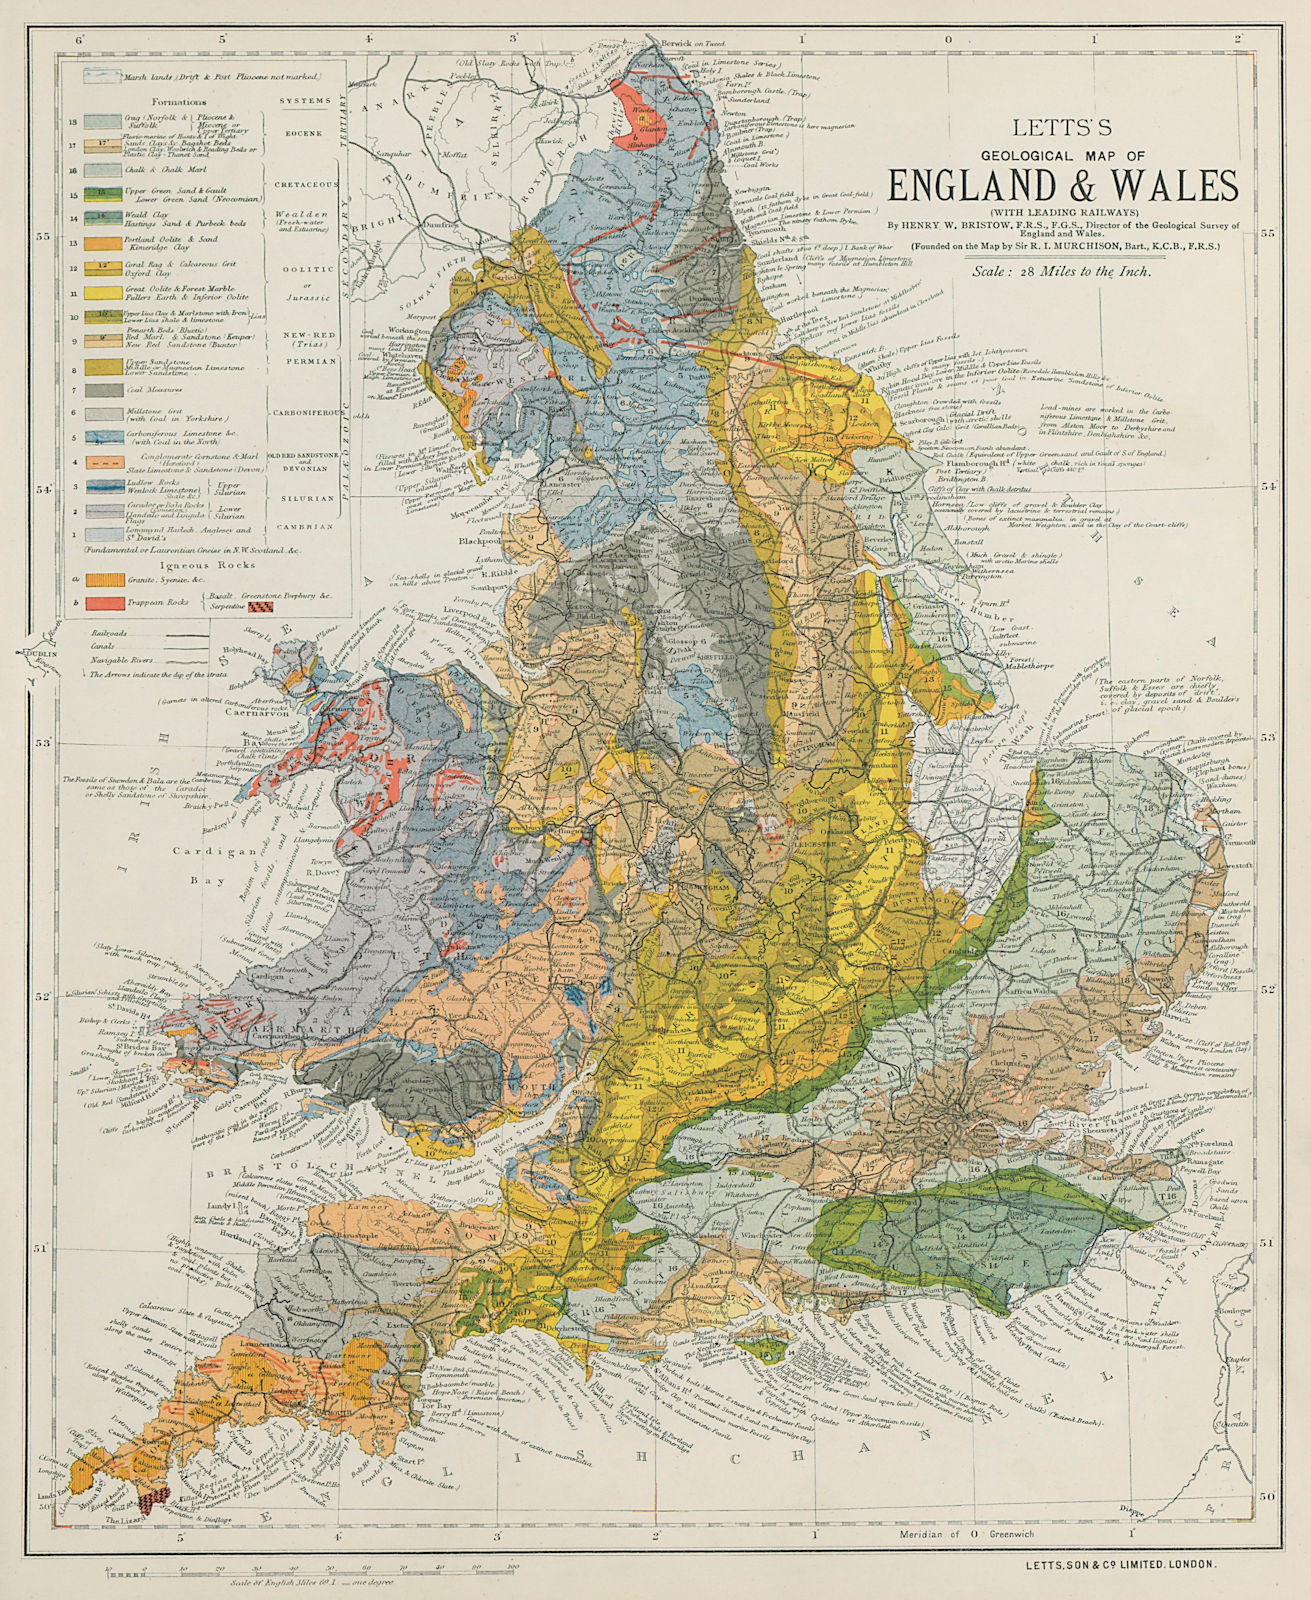 Associate Product ENGLAND & WALES colour geological Map. LETTS 1884 old antique plan chart